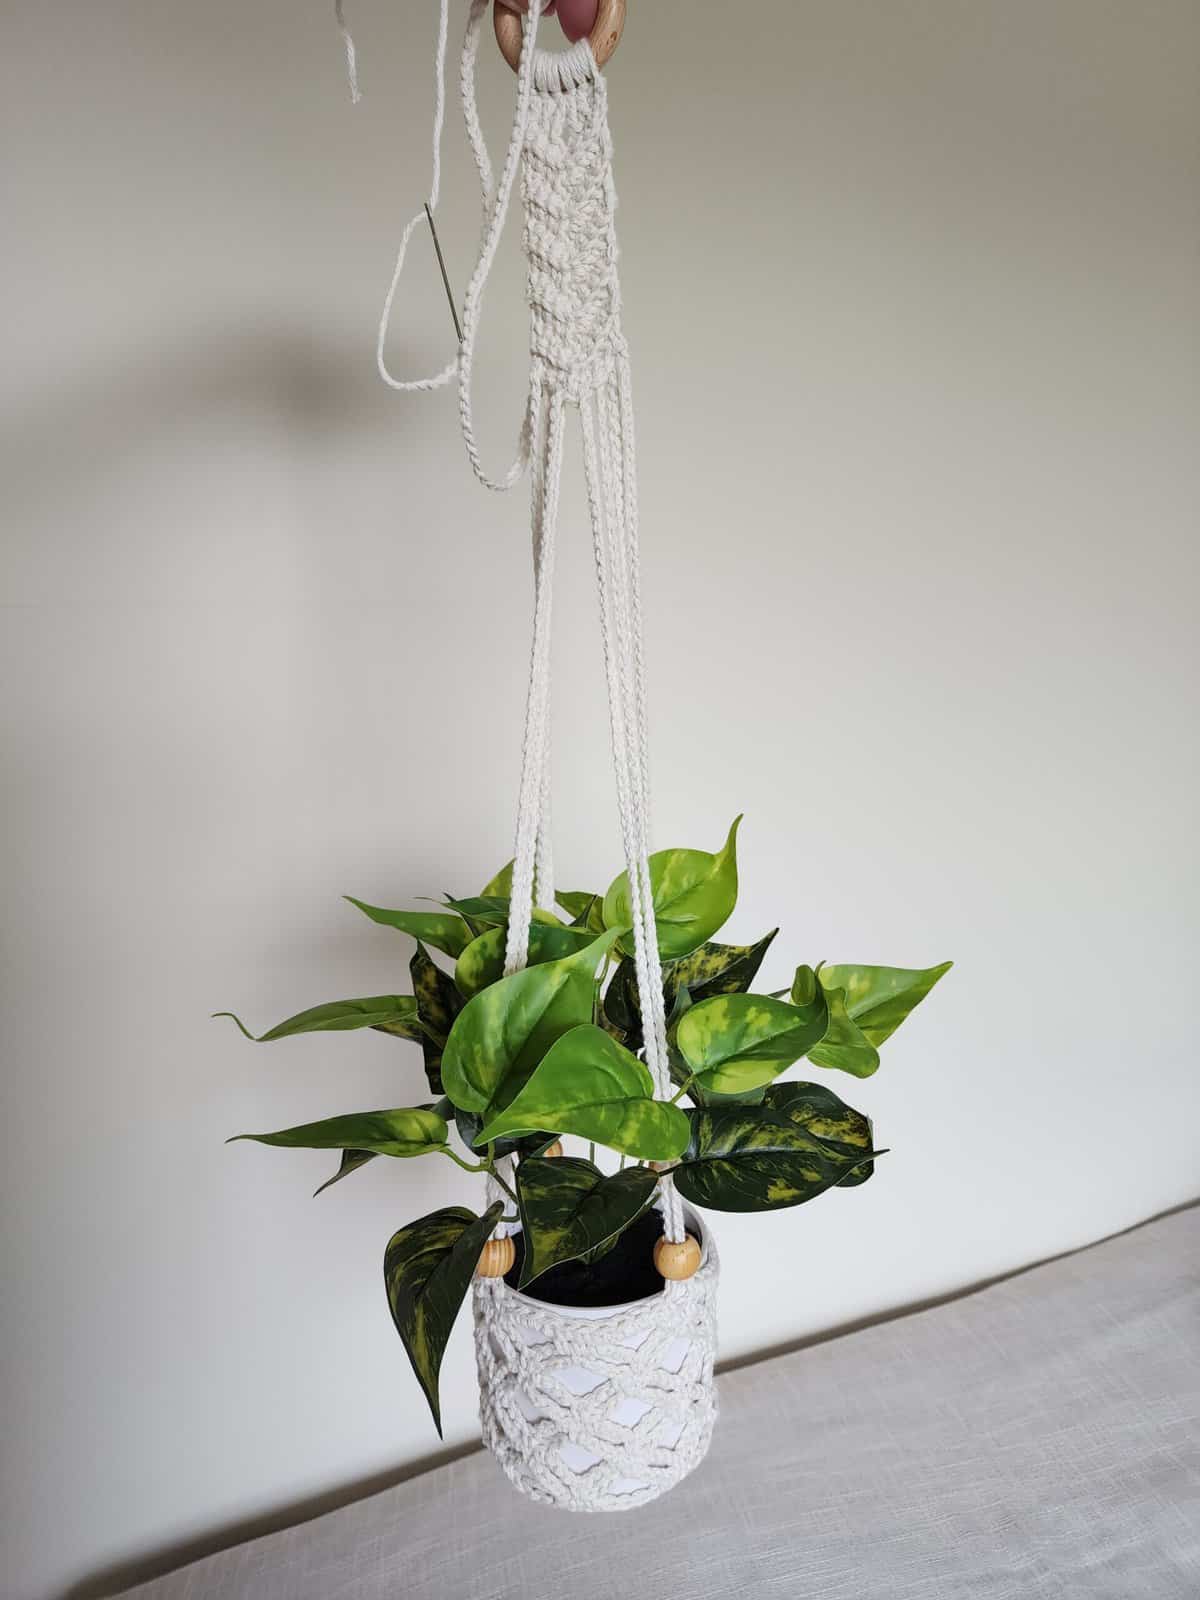 Small green plant in crochet plant hanger being held by hand to adjust hanging straps.